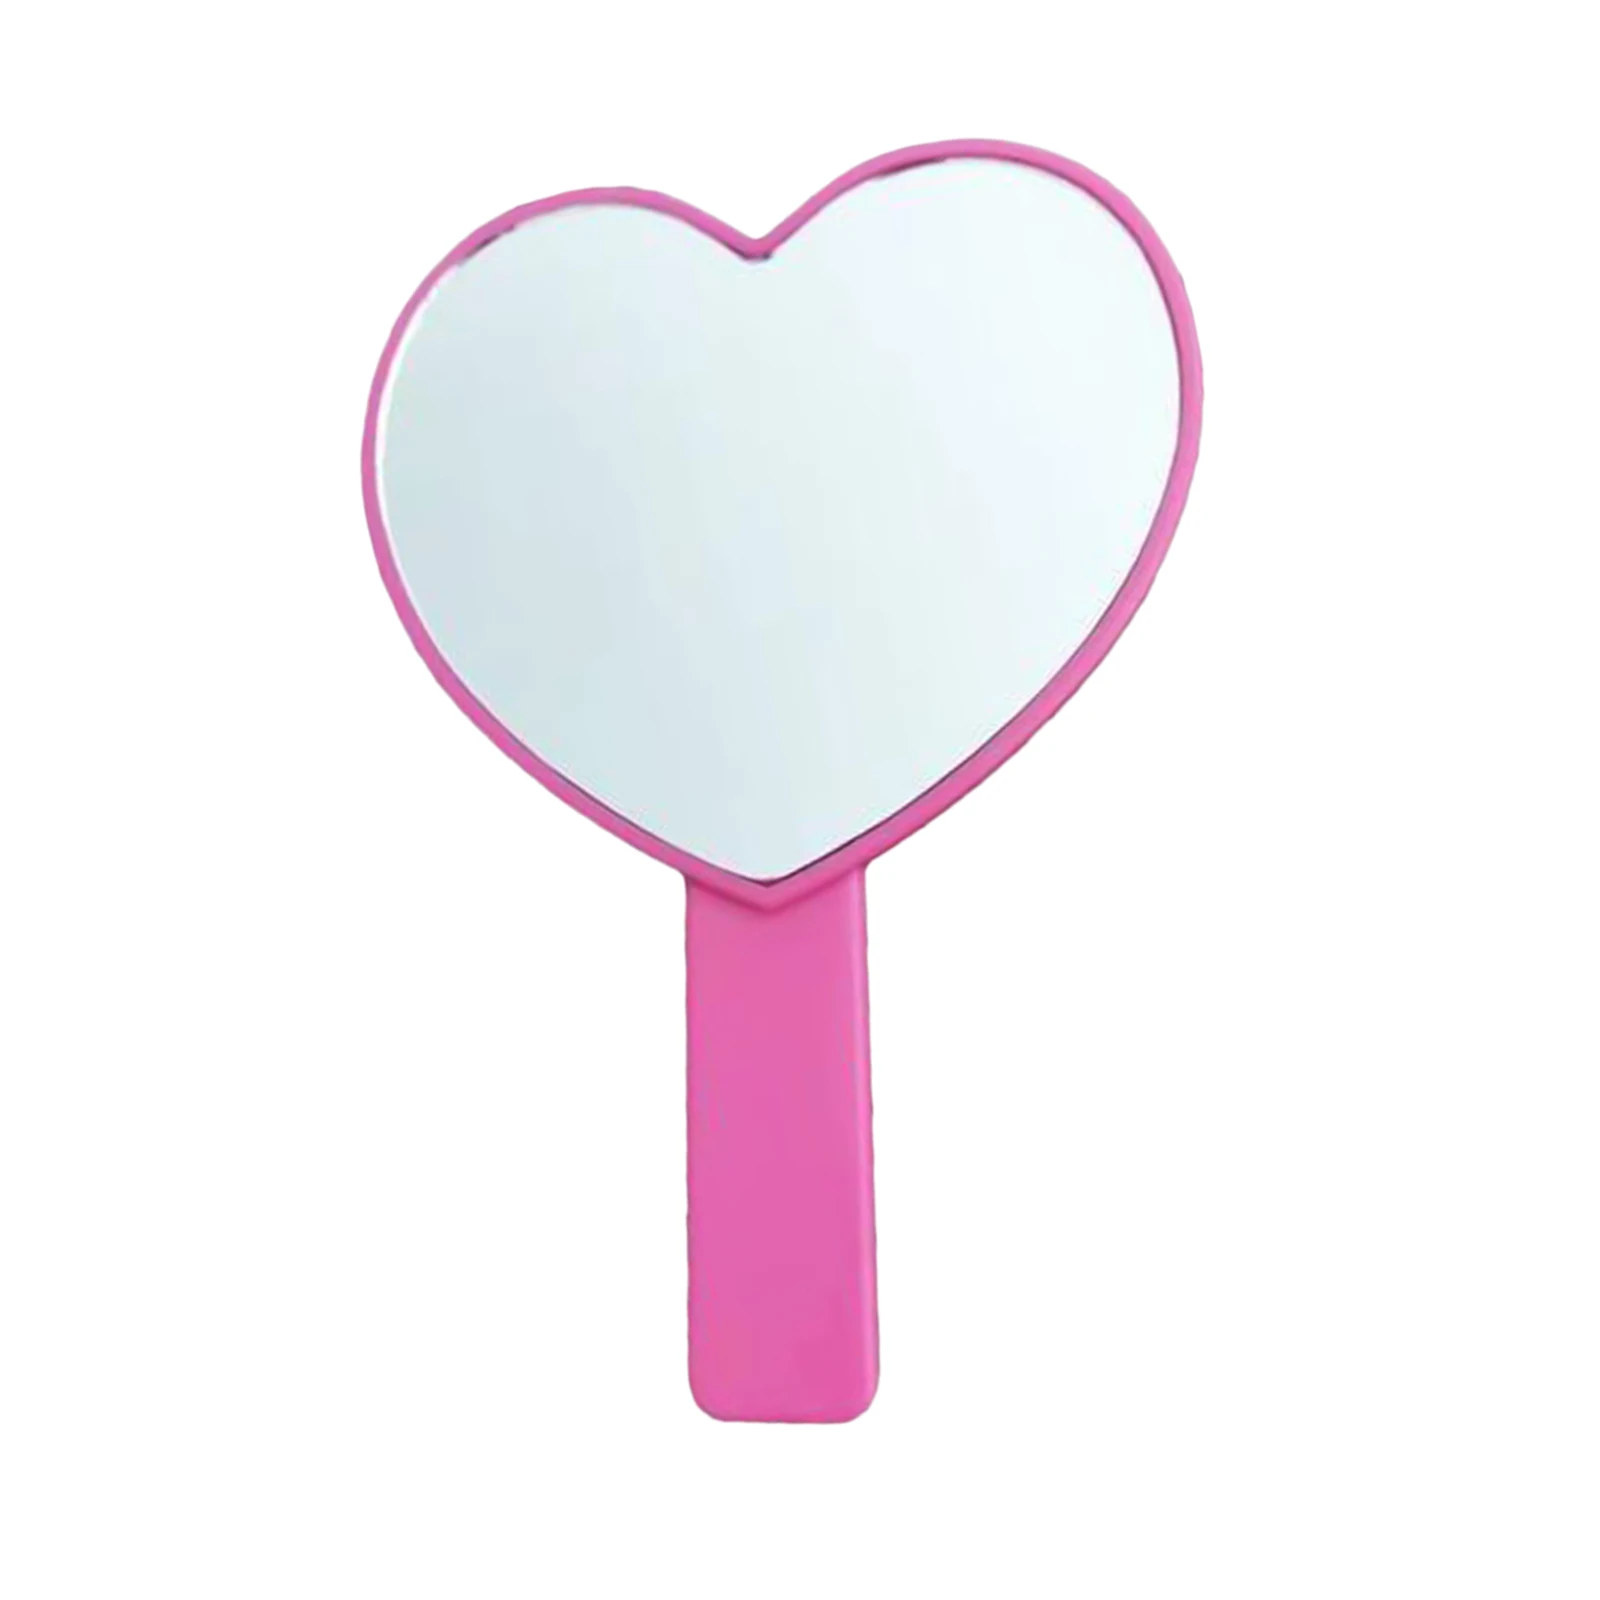 Small Compact Makeup Heart Shaped Mirror with Handle Look Adorable Design